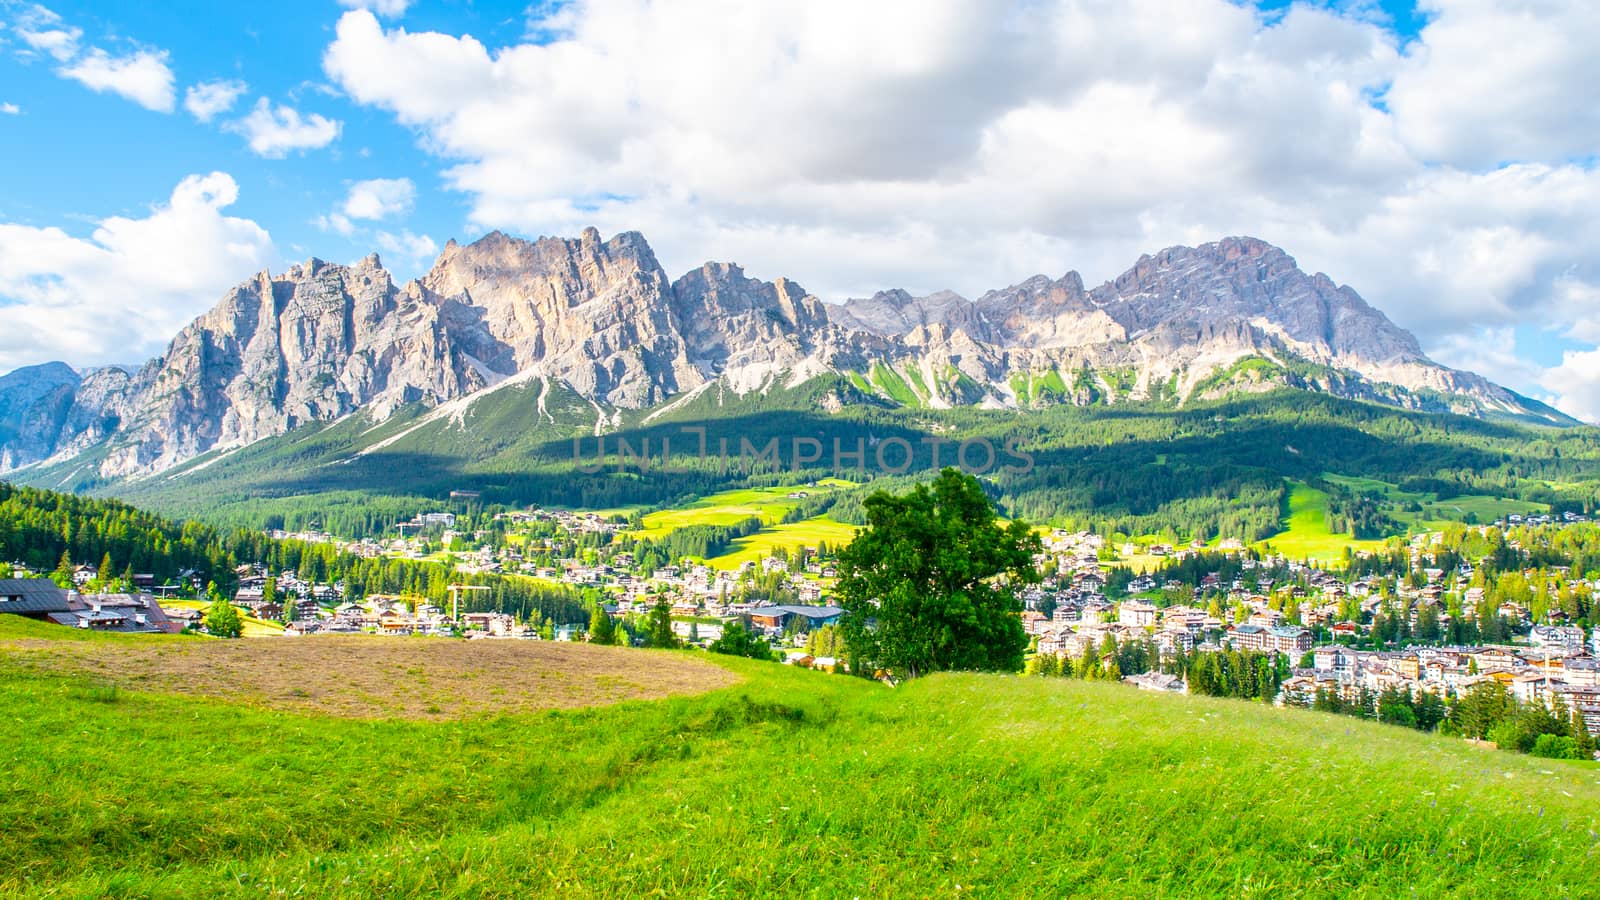 Panorama of Cortina d'Ampezzo with green meadows and alpine peaks on the background. Dolomites, Italy. by pyty